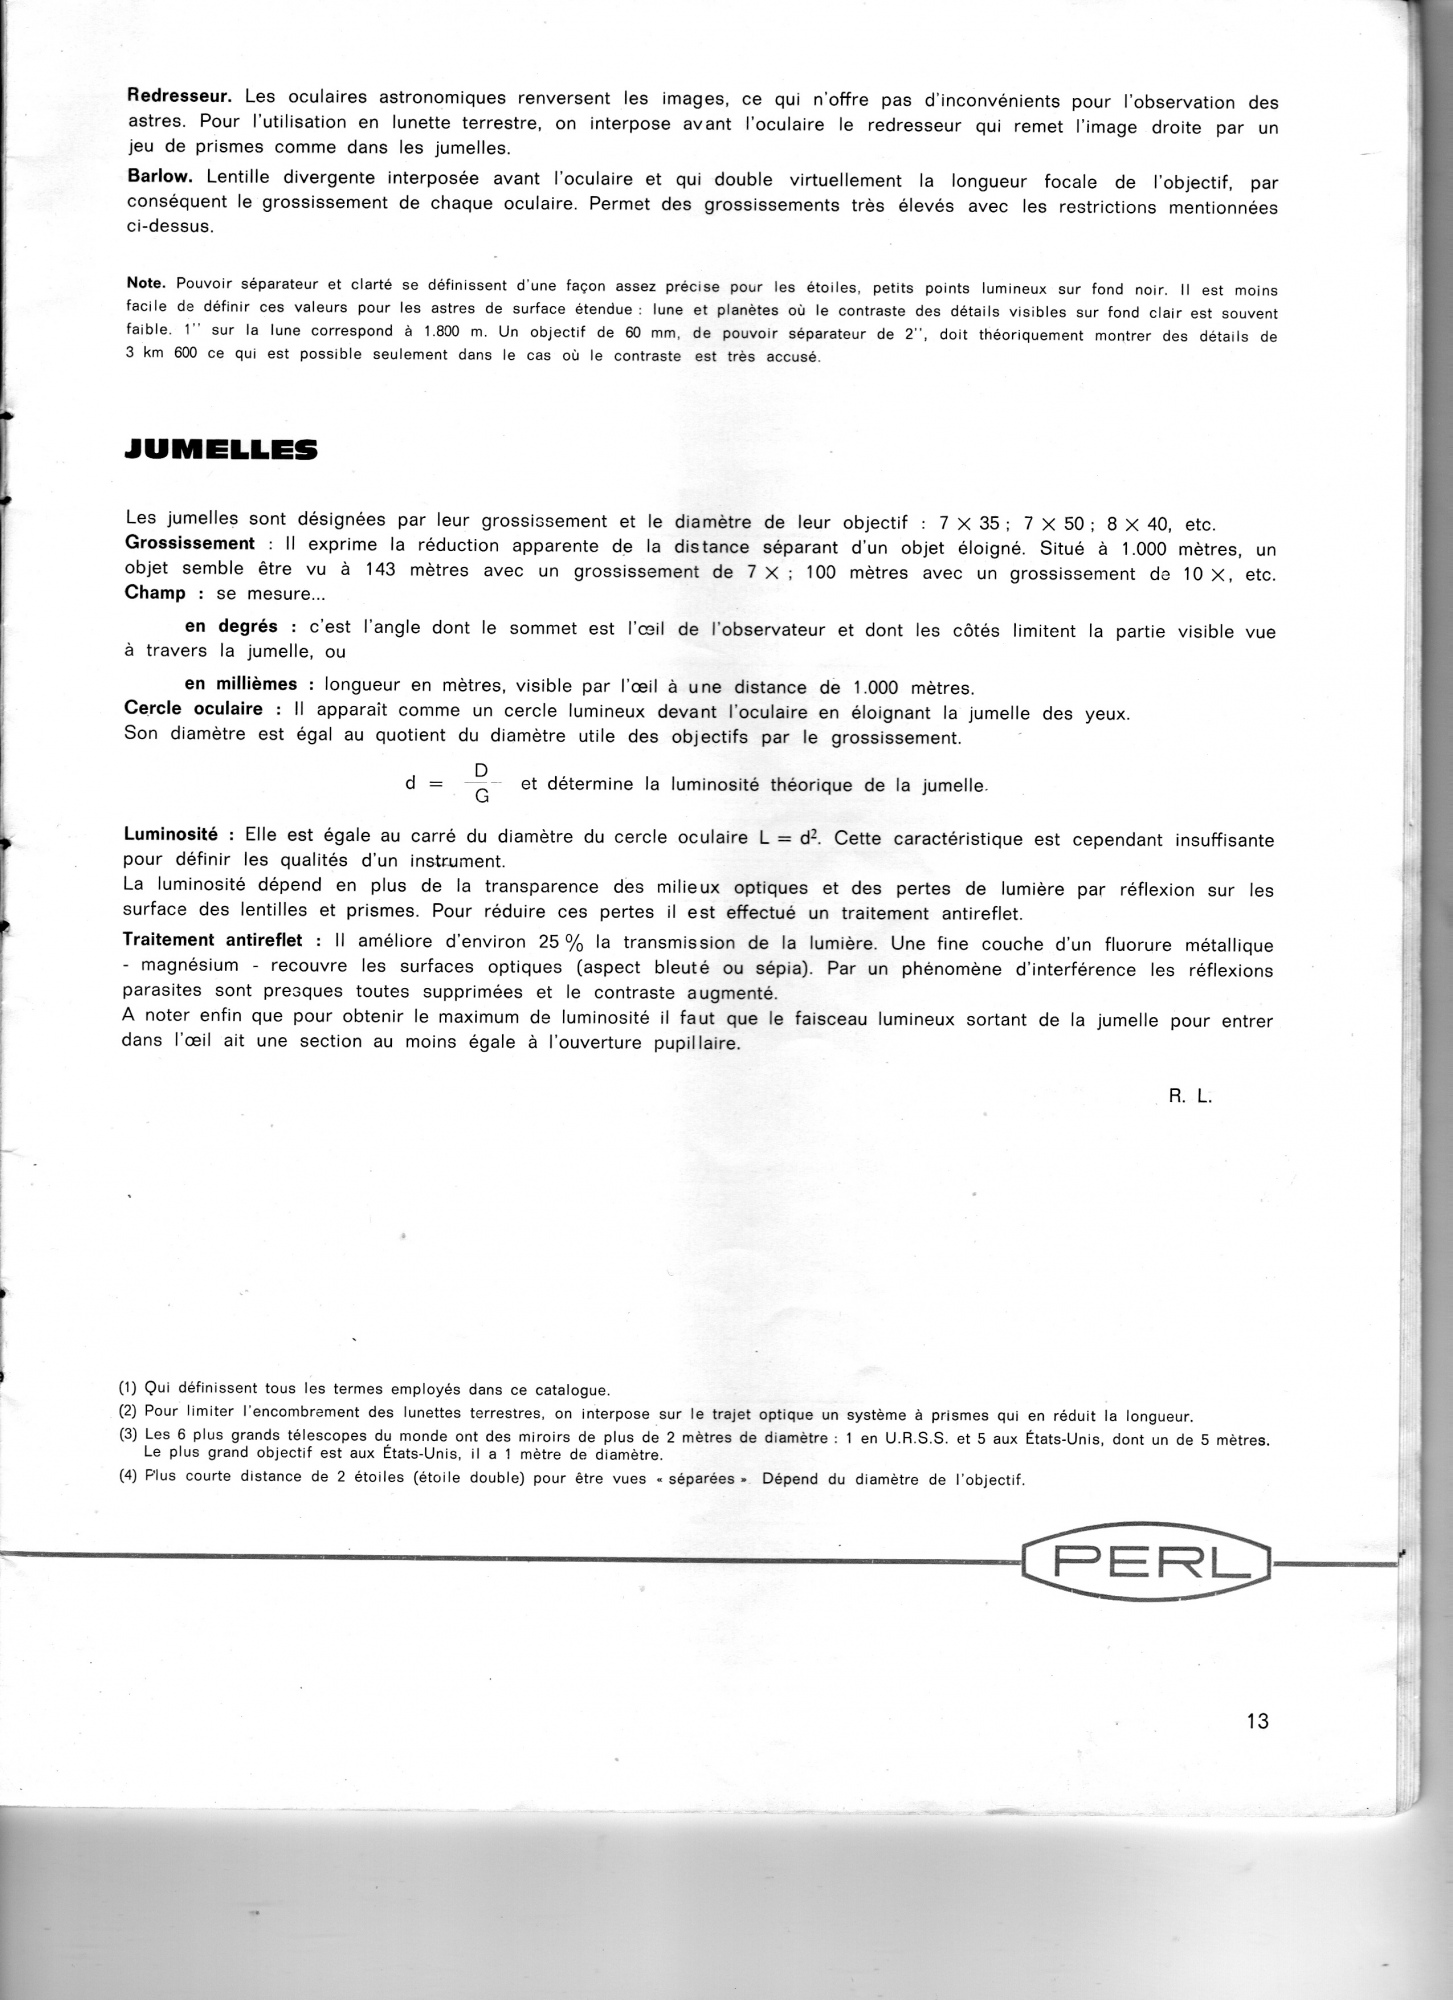 Catalogue Perl 1969 page 13.jpg